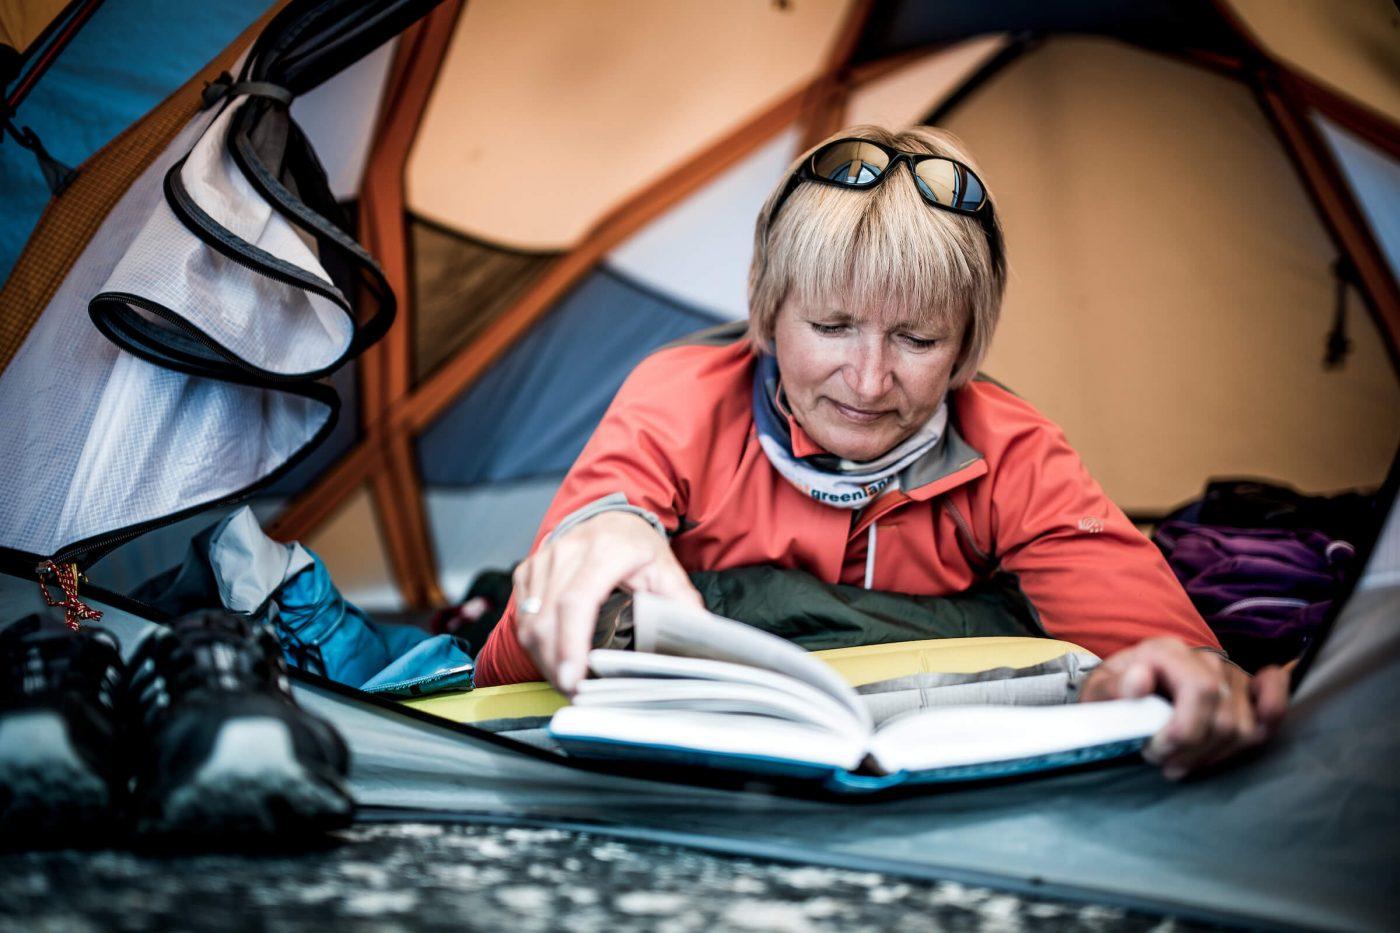 A hiker reading a book in a tent in East Greenland. By Mads Pihl